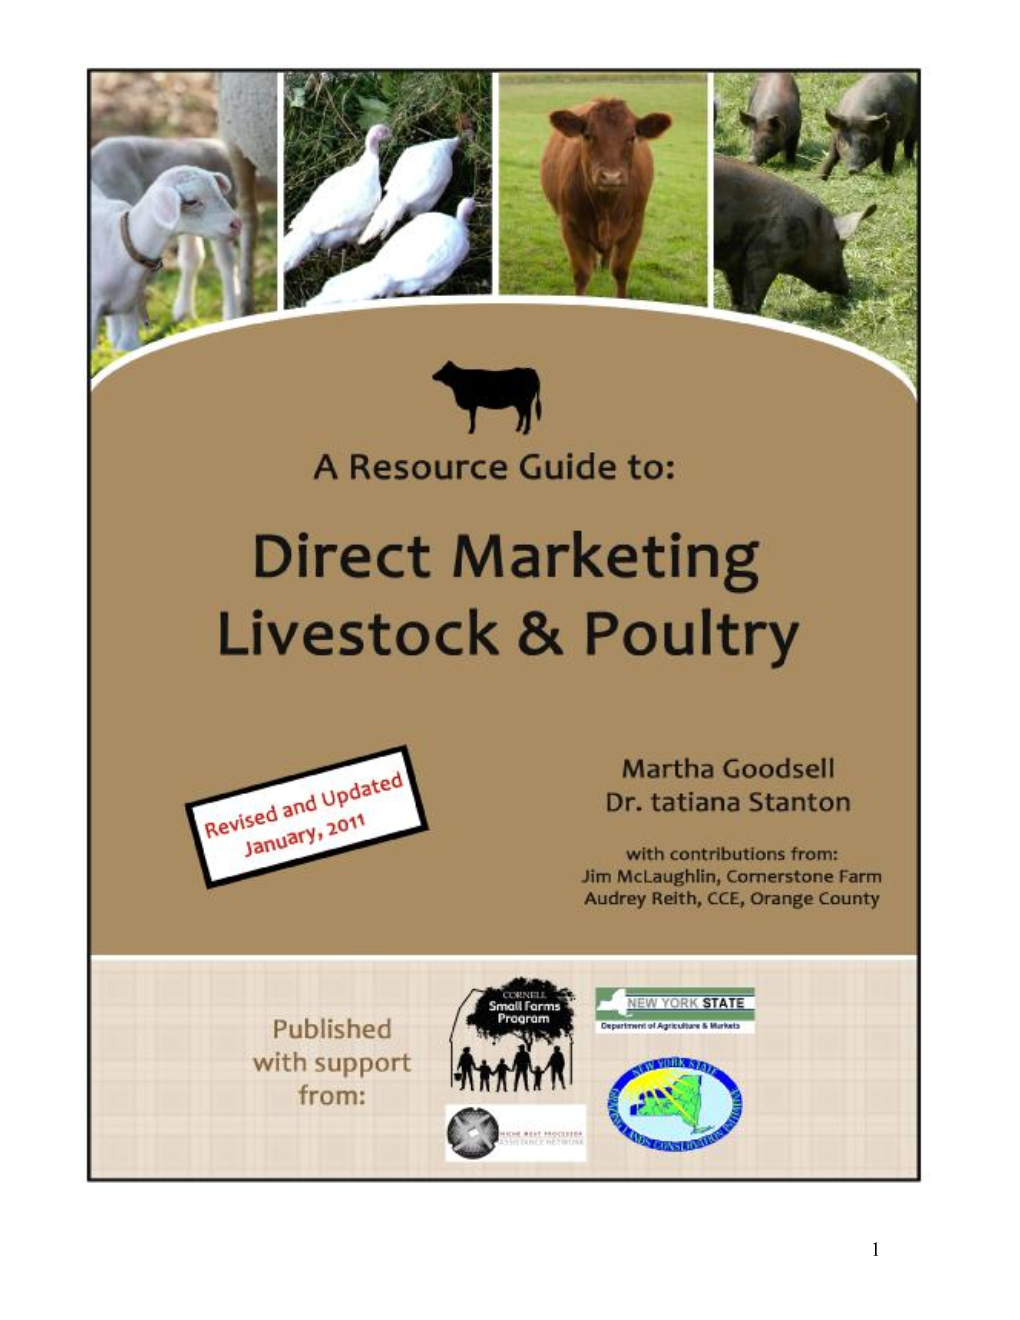 A Resource Guide to Direct Marketing Livestock and Poultry